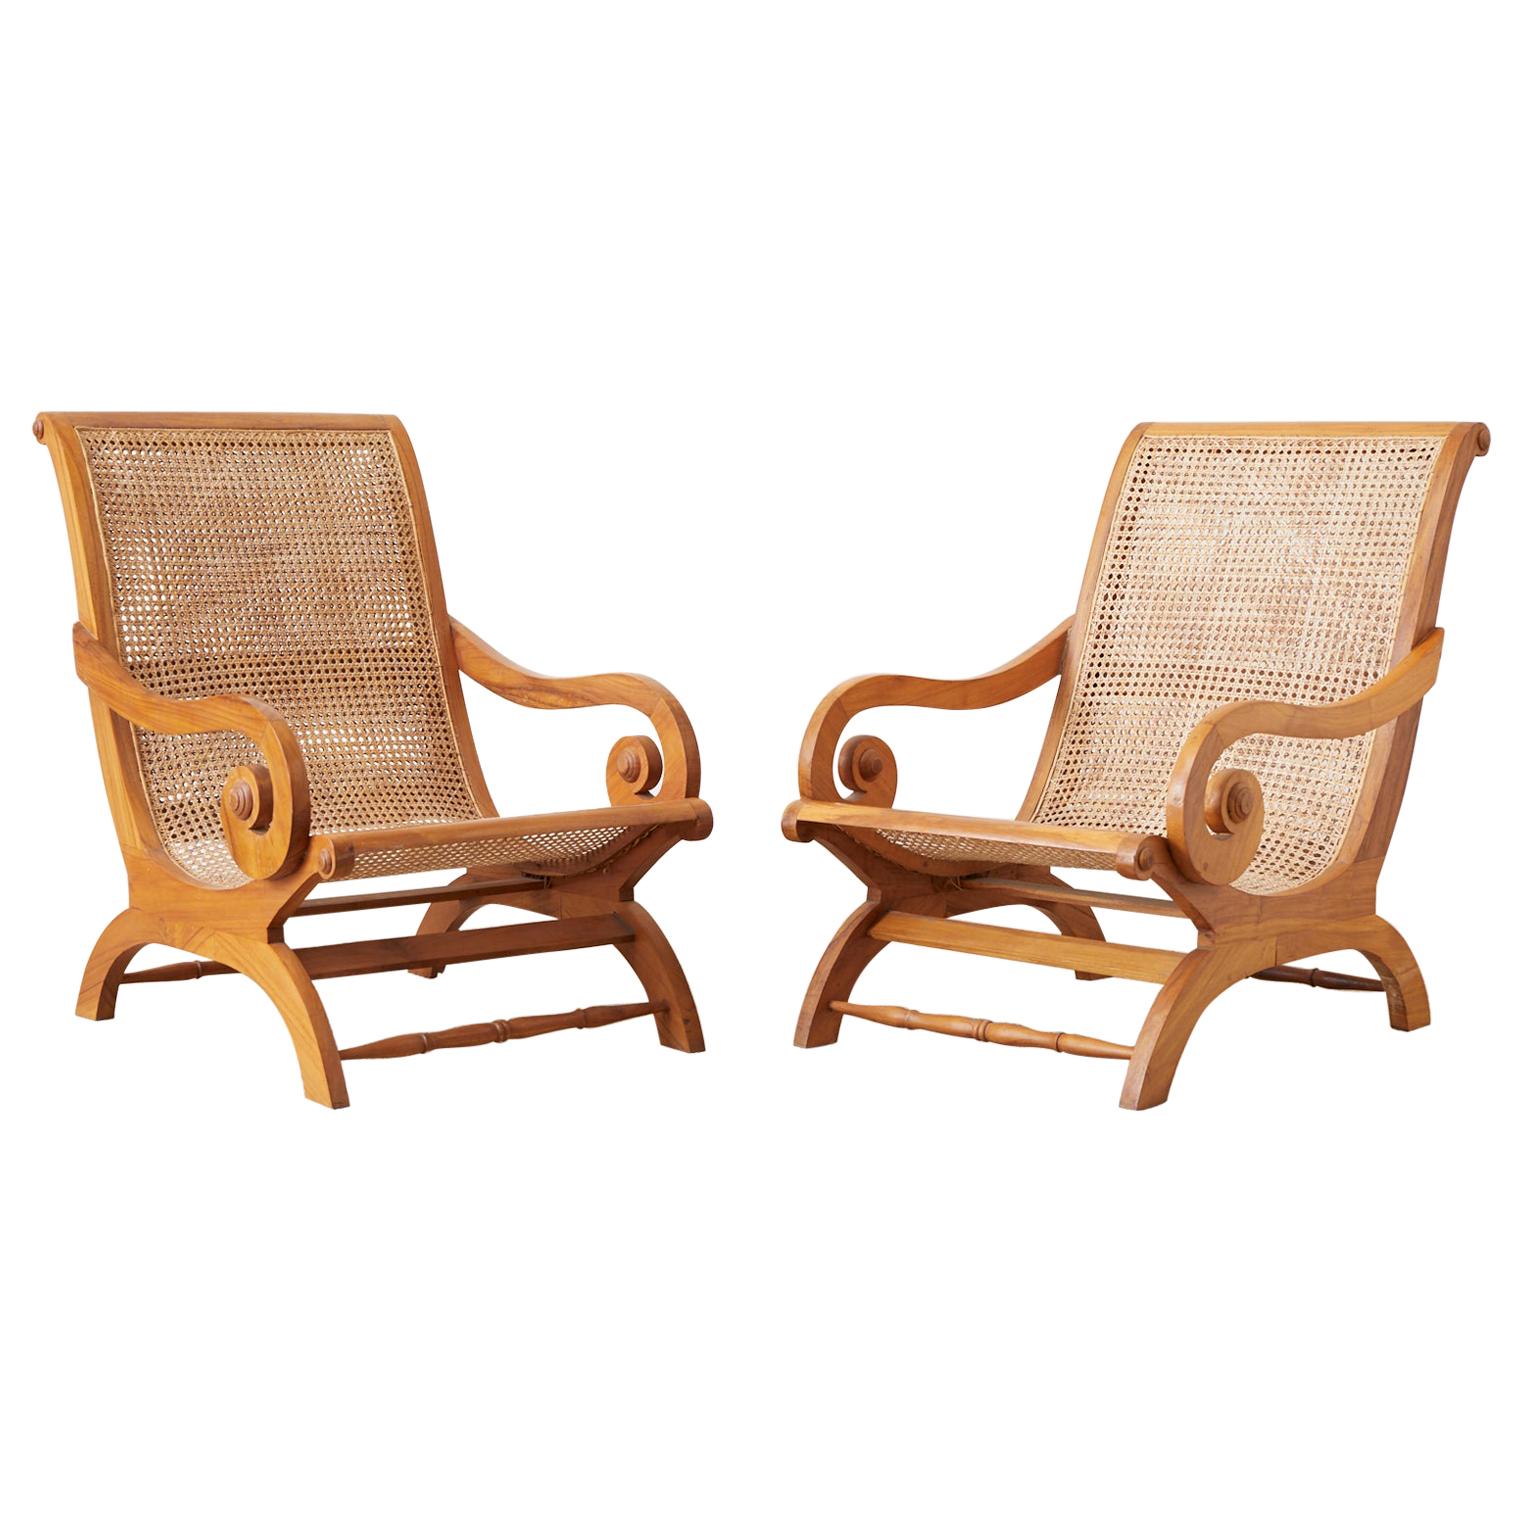 Pair of British Colonial Teak and Cane Plantation Chairs